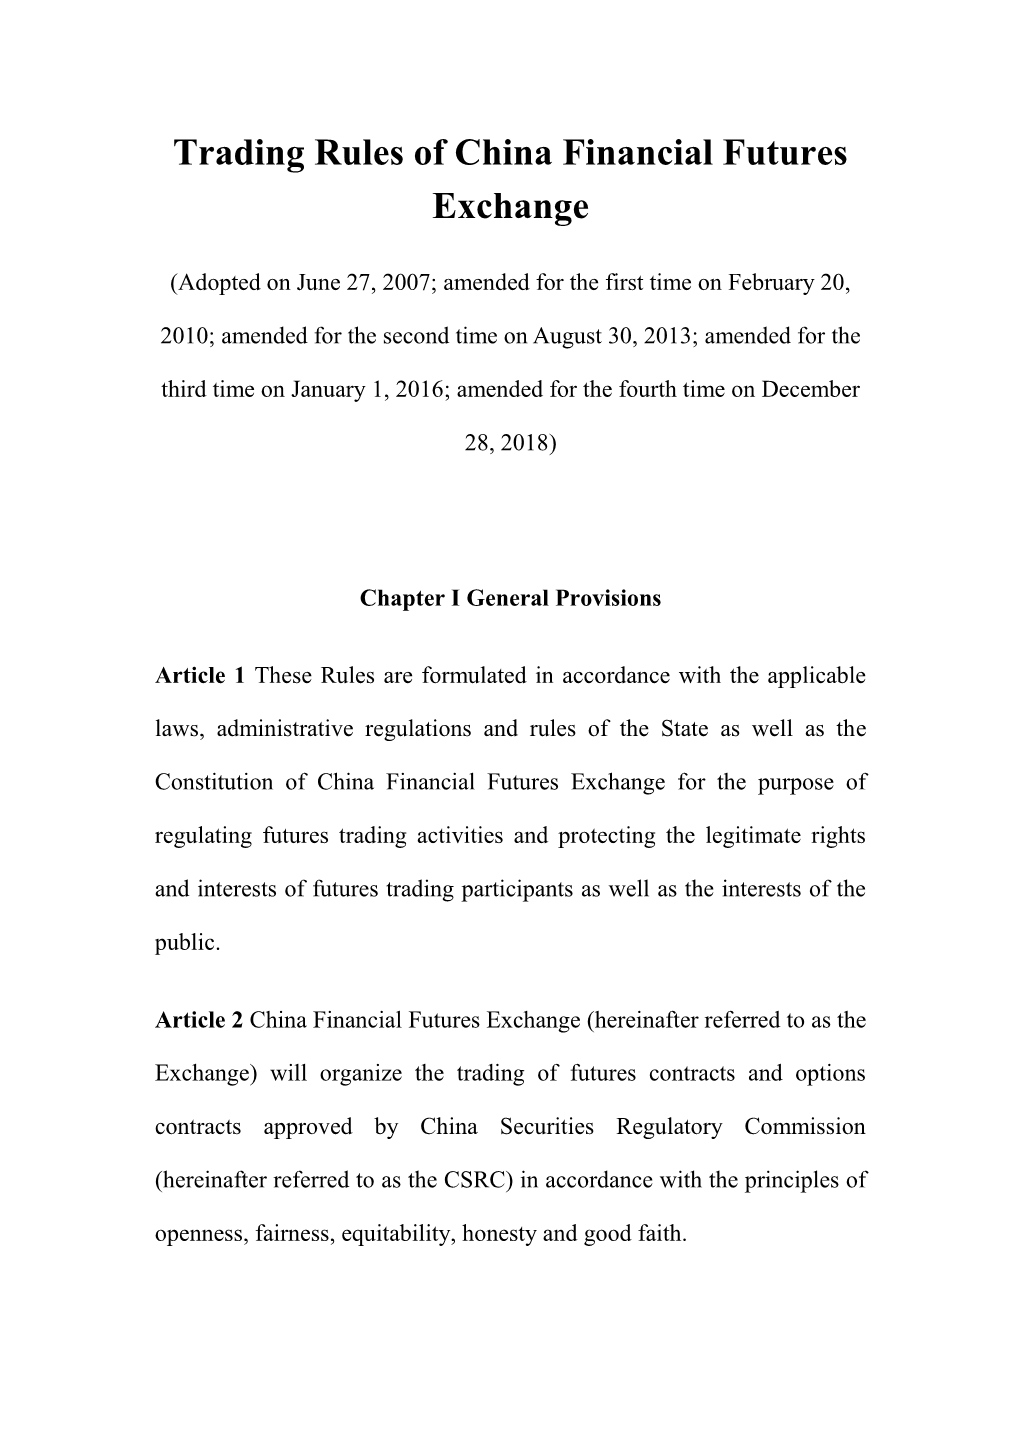 Trading Rules of China Financial Futures Exchange